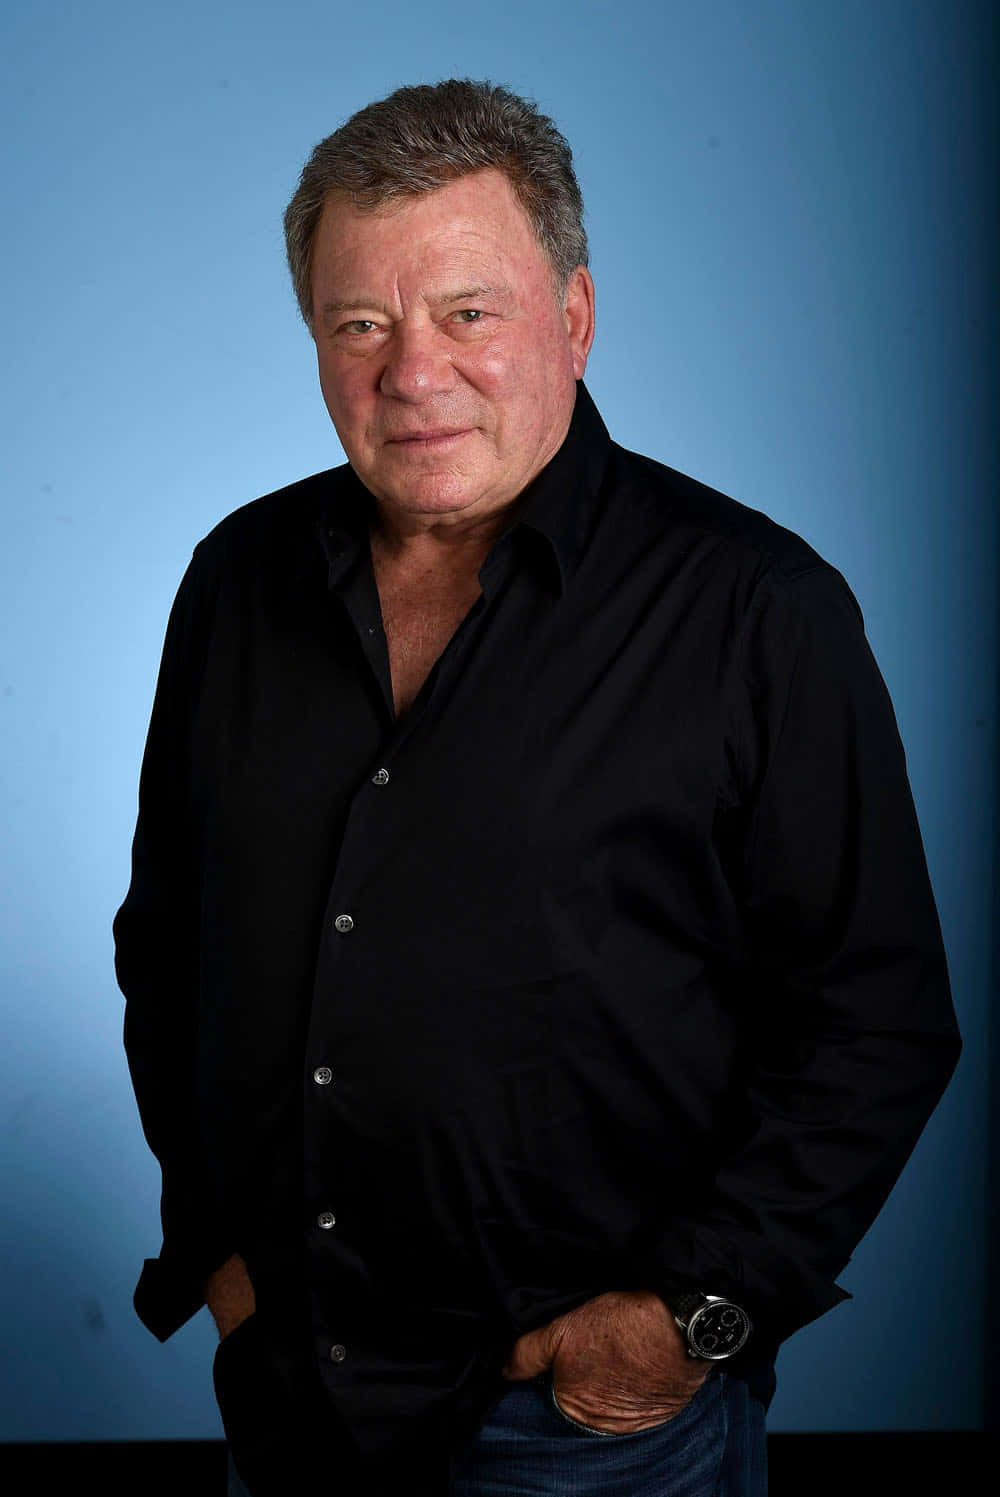 A Charismatic Portrait Of William Shatner Background